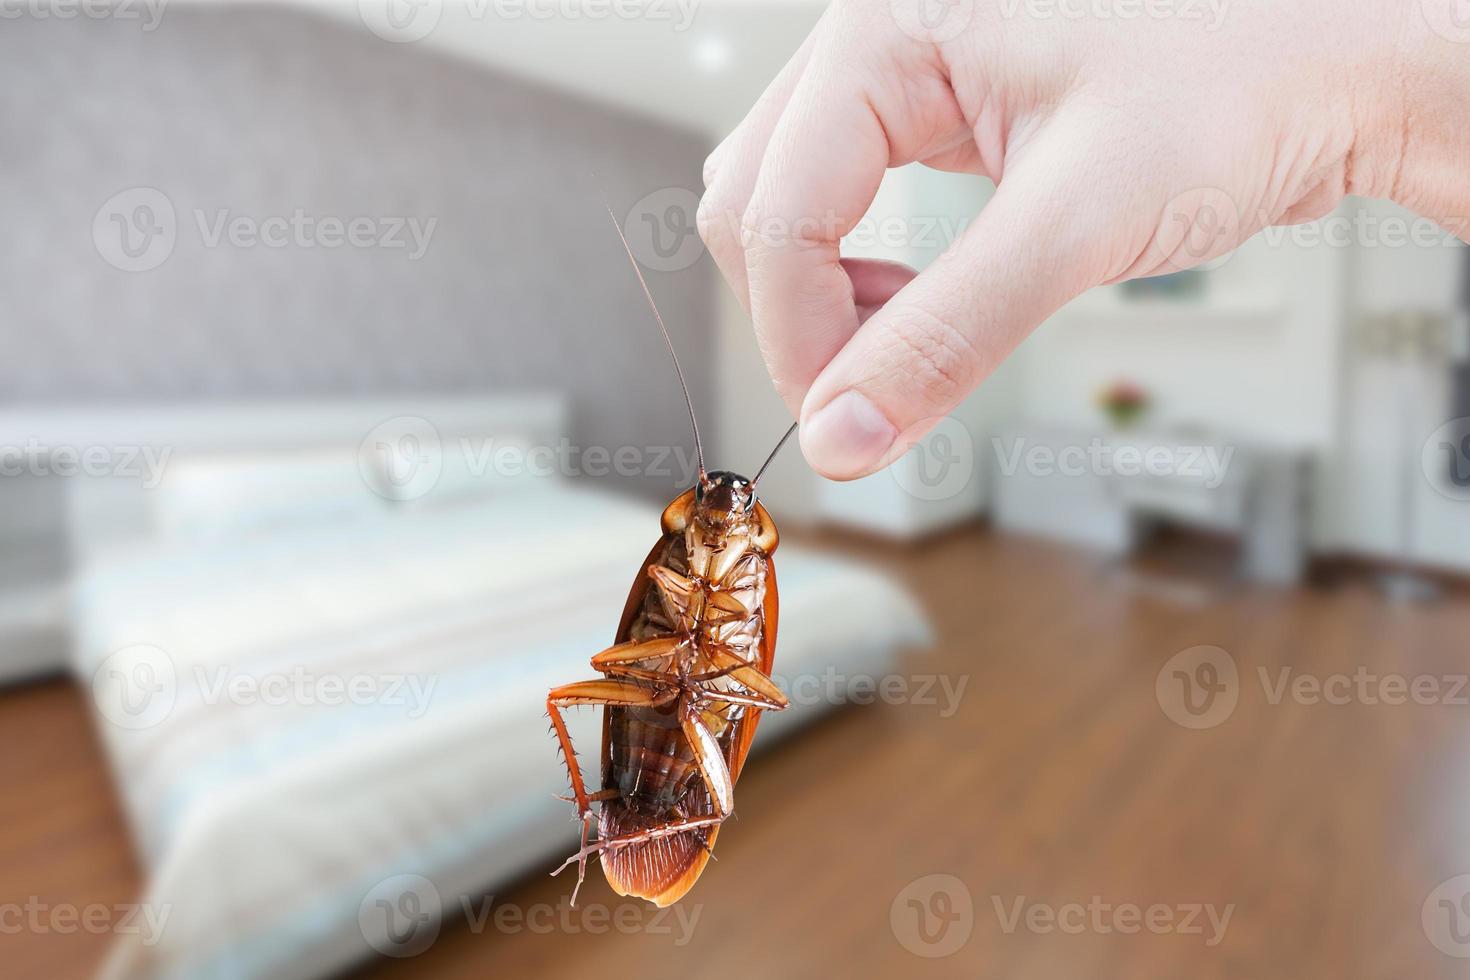 Hand holding cockroach on room in house background, eliminate cockroach in room house,Cockroaches as carriers of disease photo